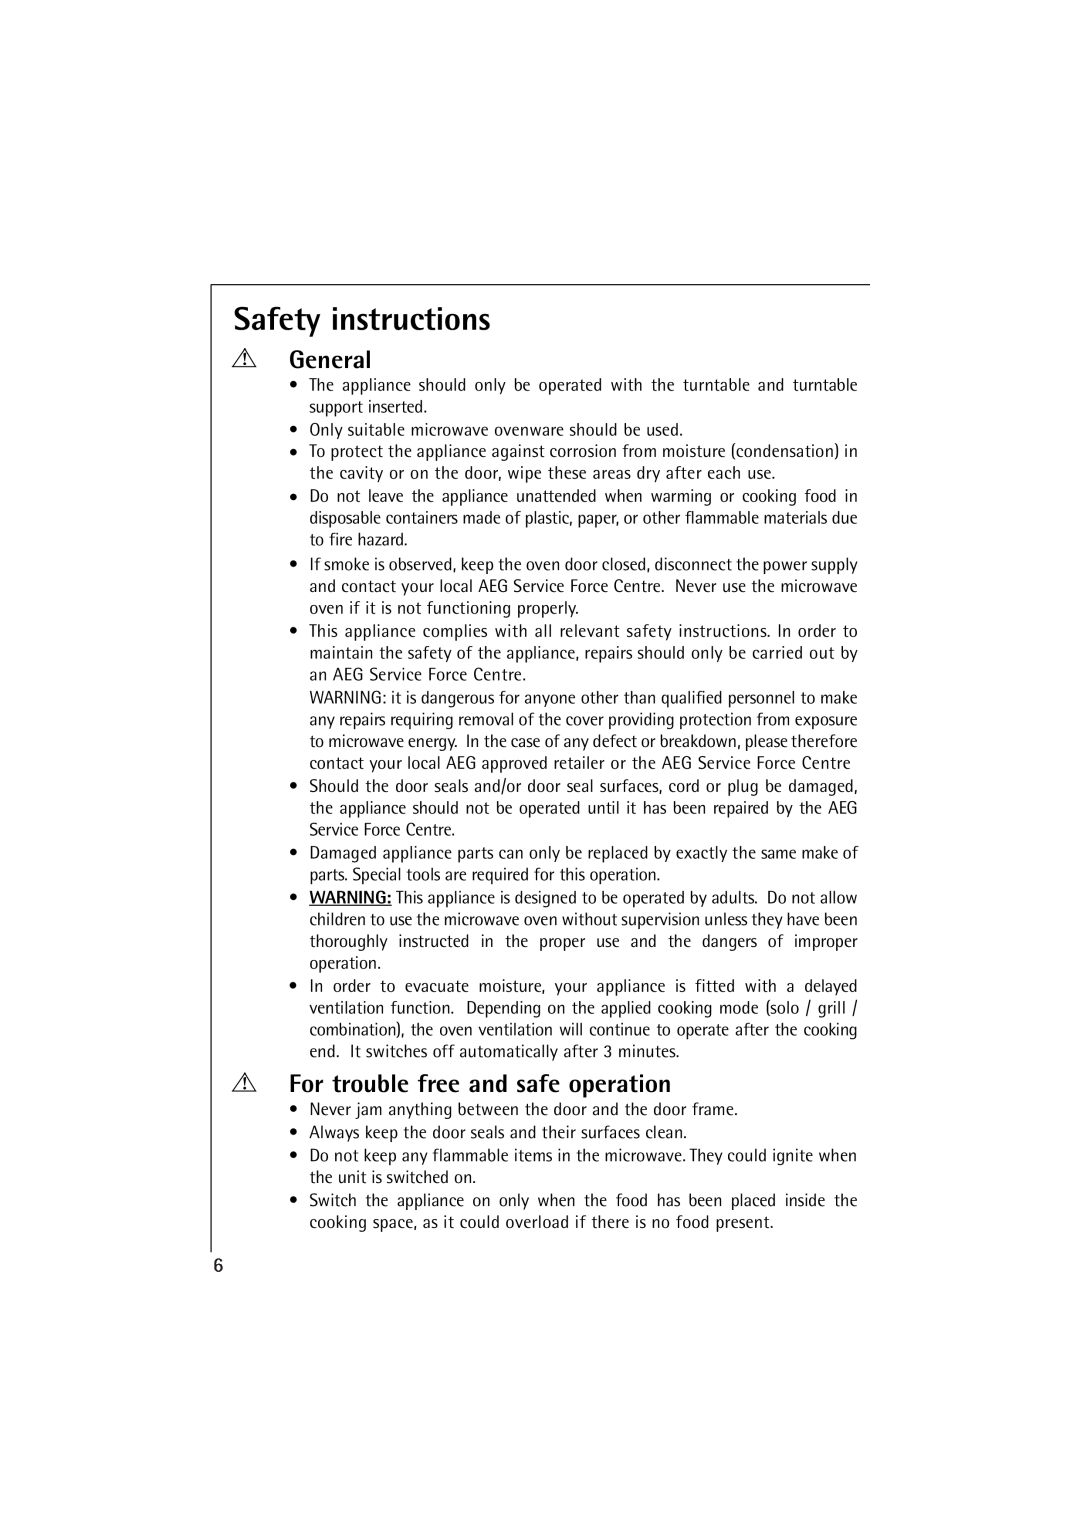 AEG MCC 663 instruction manual Safety instructions, General, For trouble free and safe operation 